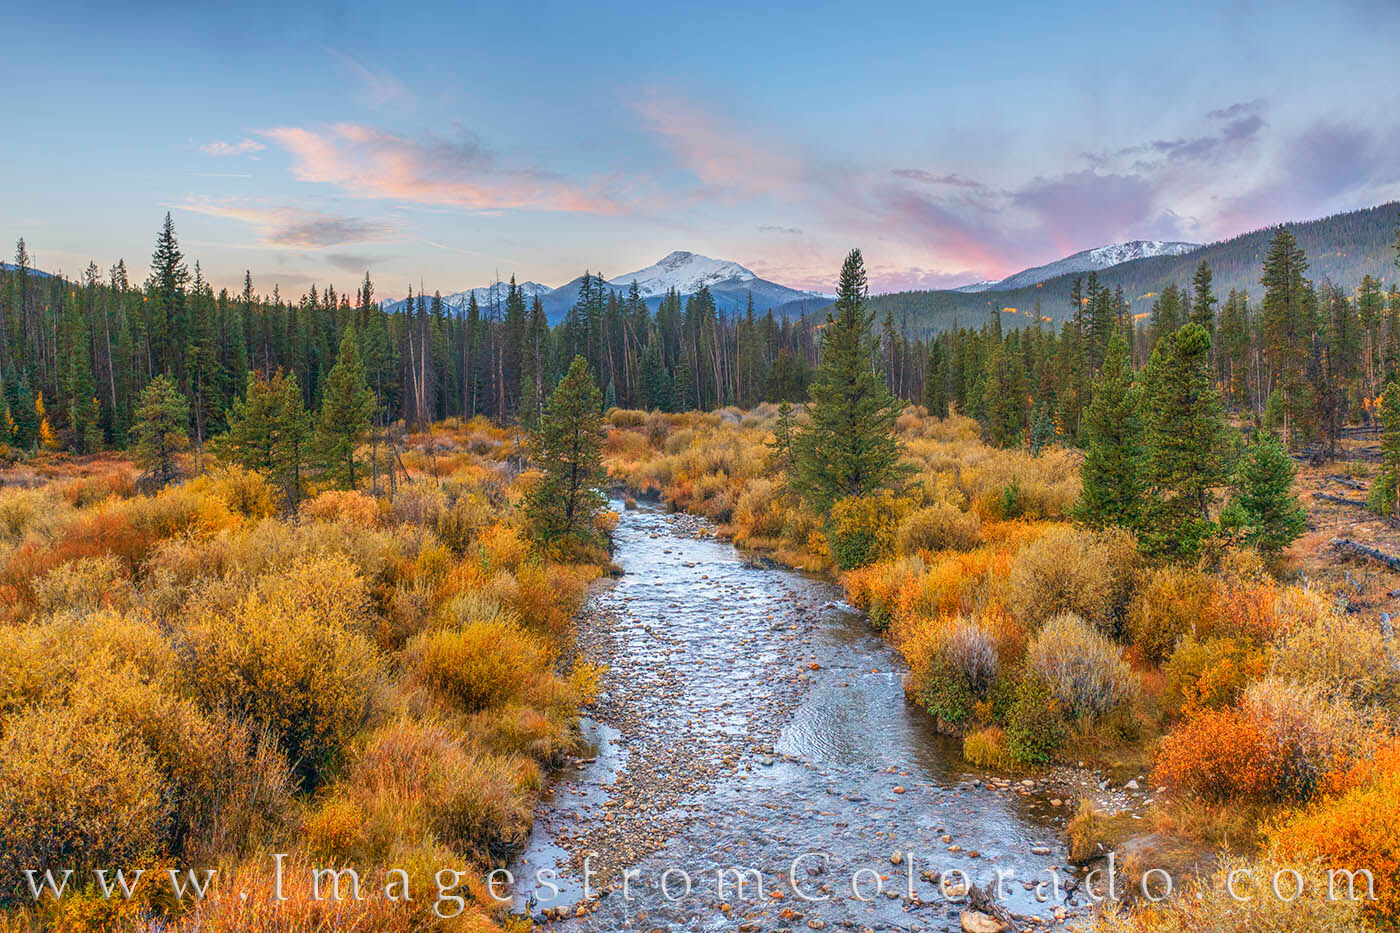 St. Louis Creek acts as a foreground surrounded in the gold of Autumn colors as Byers Peak rises into the cold October morning sky.